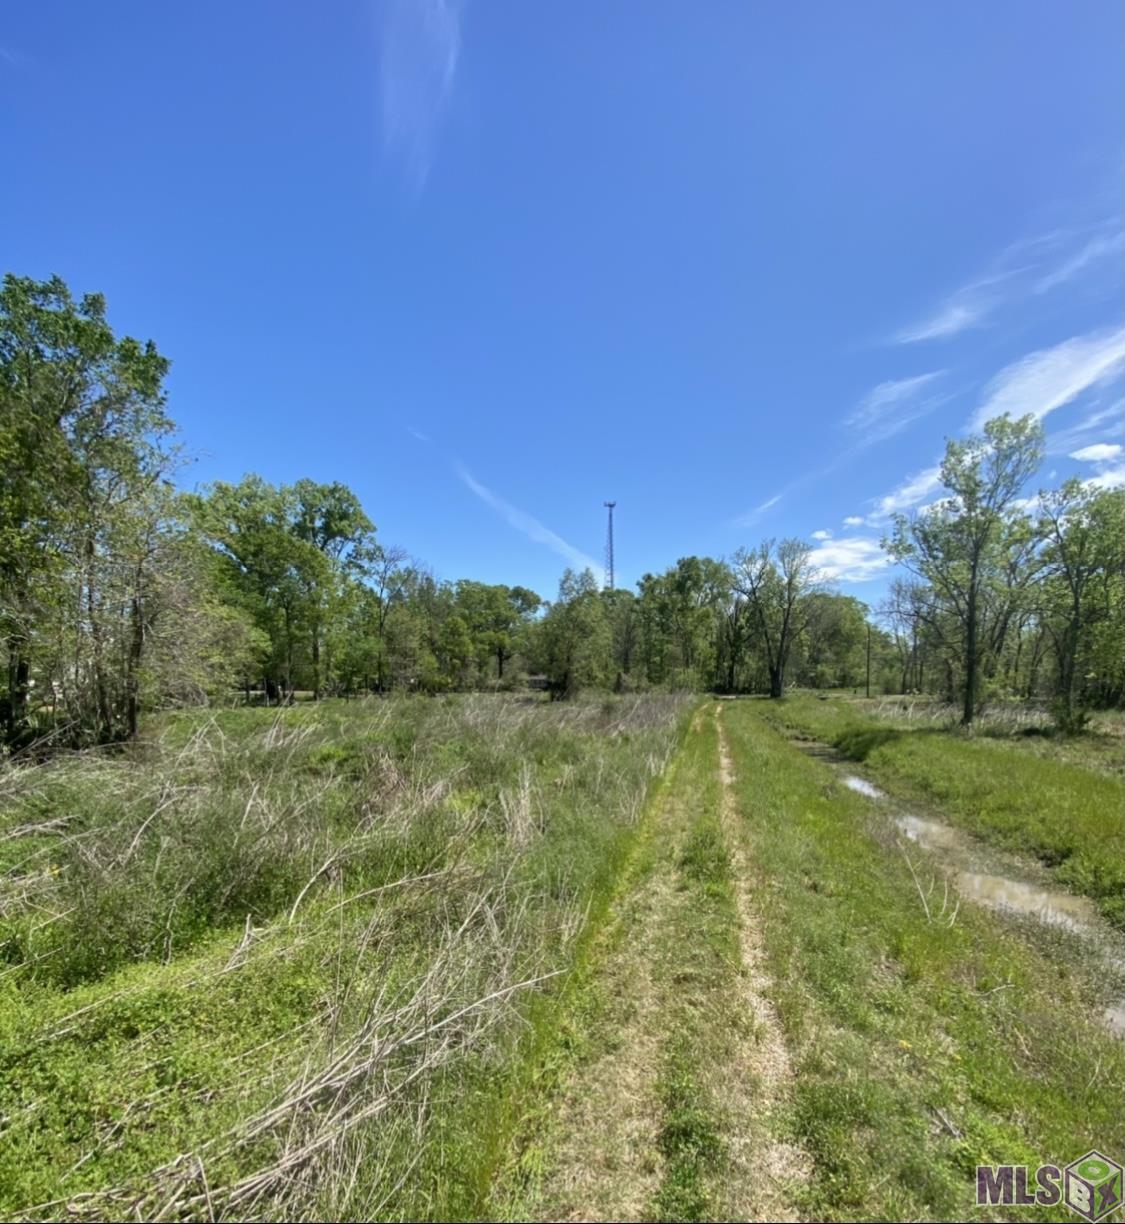 16.42 Acres in the perfect location in Gonzales.  Beautiful piece of property right near the Tanger outlets and ready to be developed.  The land is already subdivided into 5 lots (4 lots at 3.56 acres each and 1 lot at 2.18 acres).  Electric is already on site, also a water well and septic. Utilities sit on lot 2, Lot 3 includes a pond.